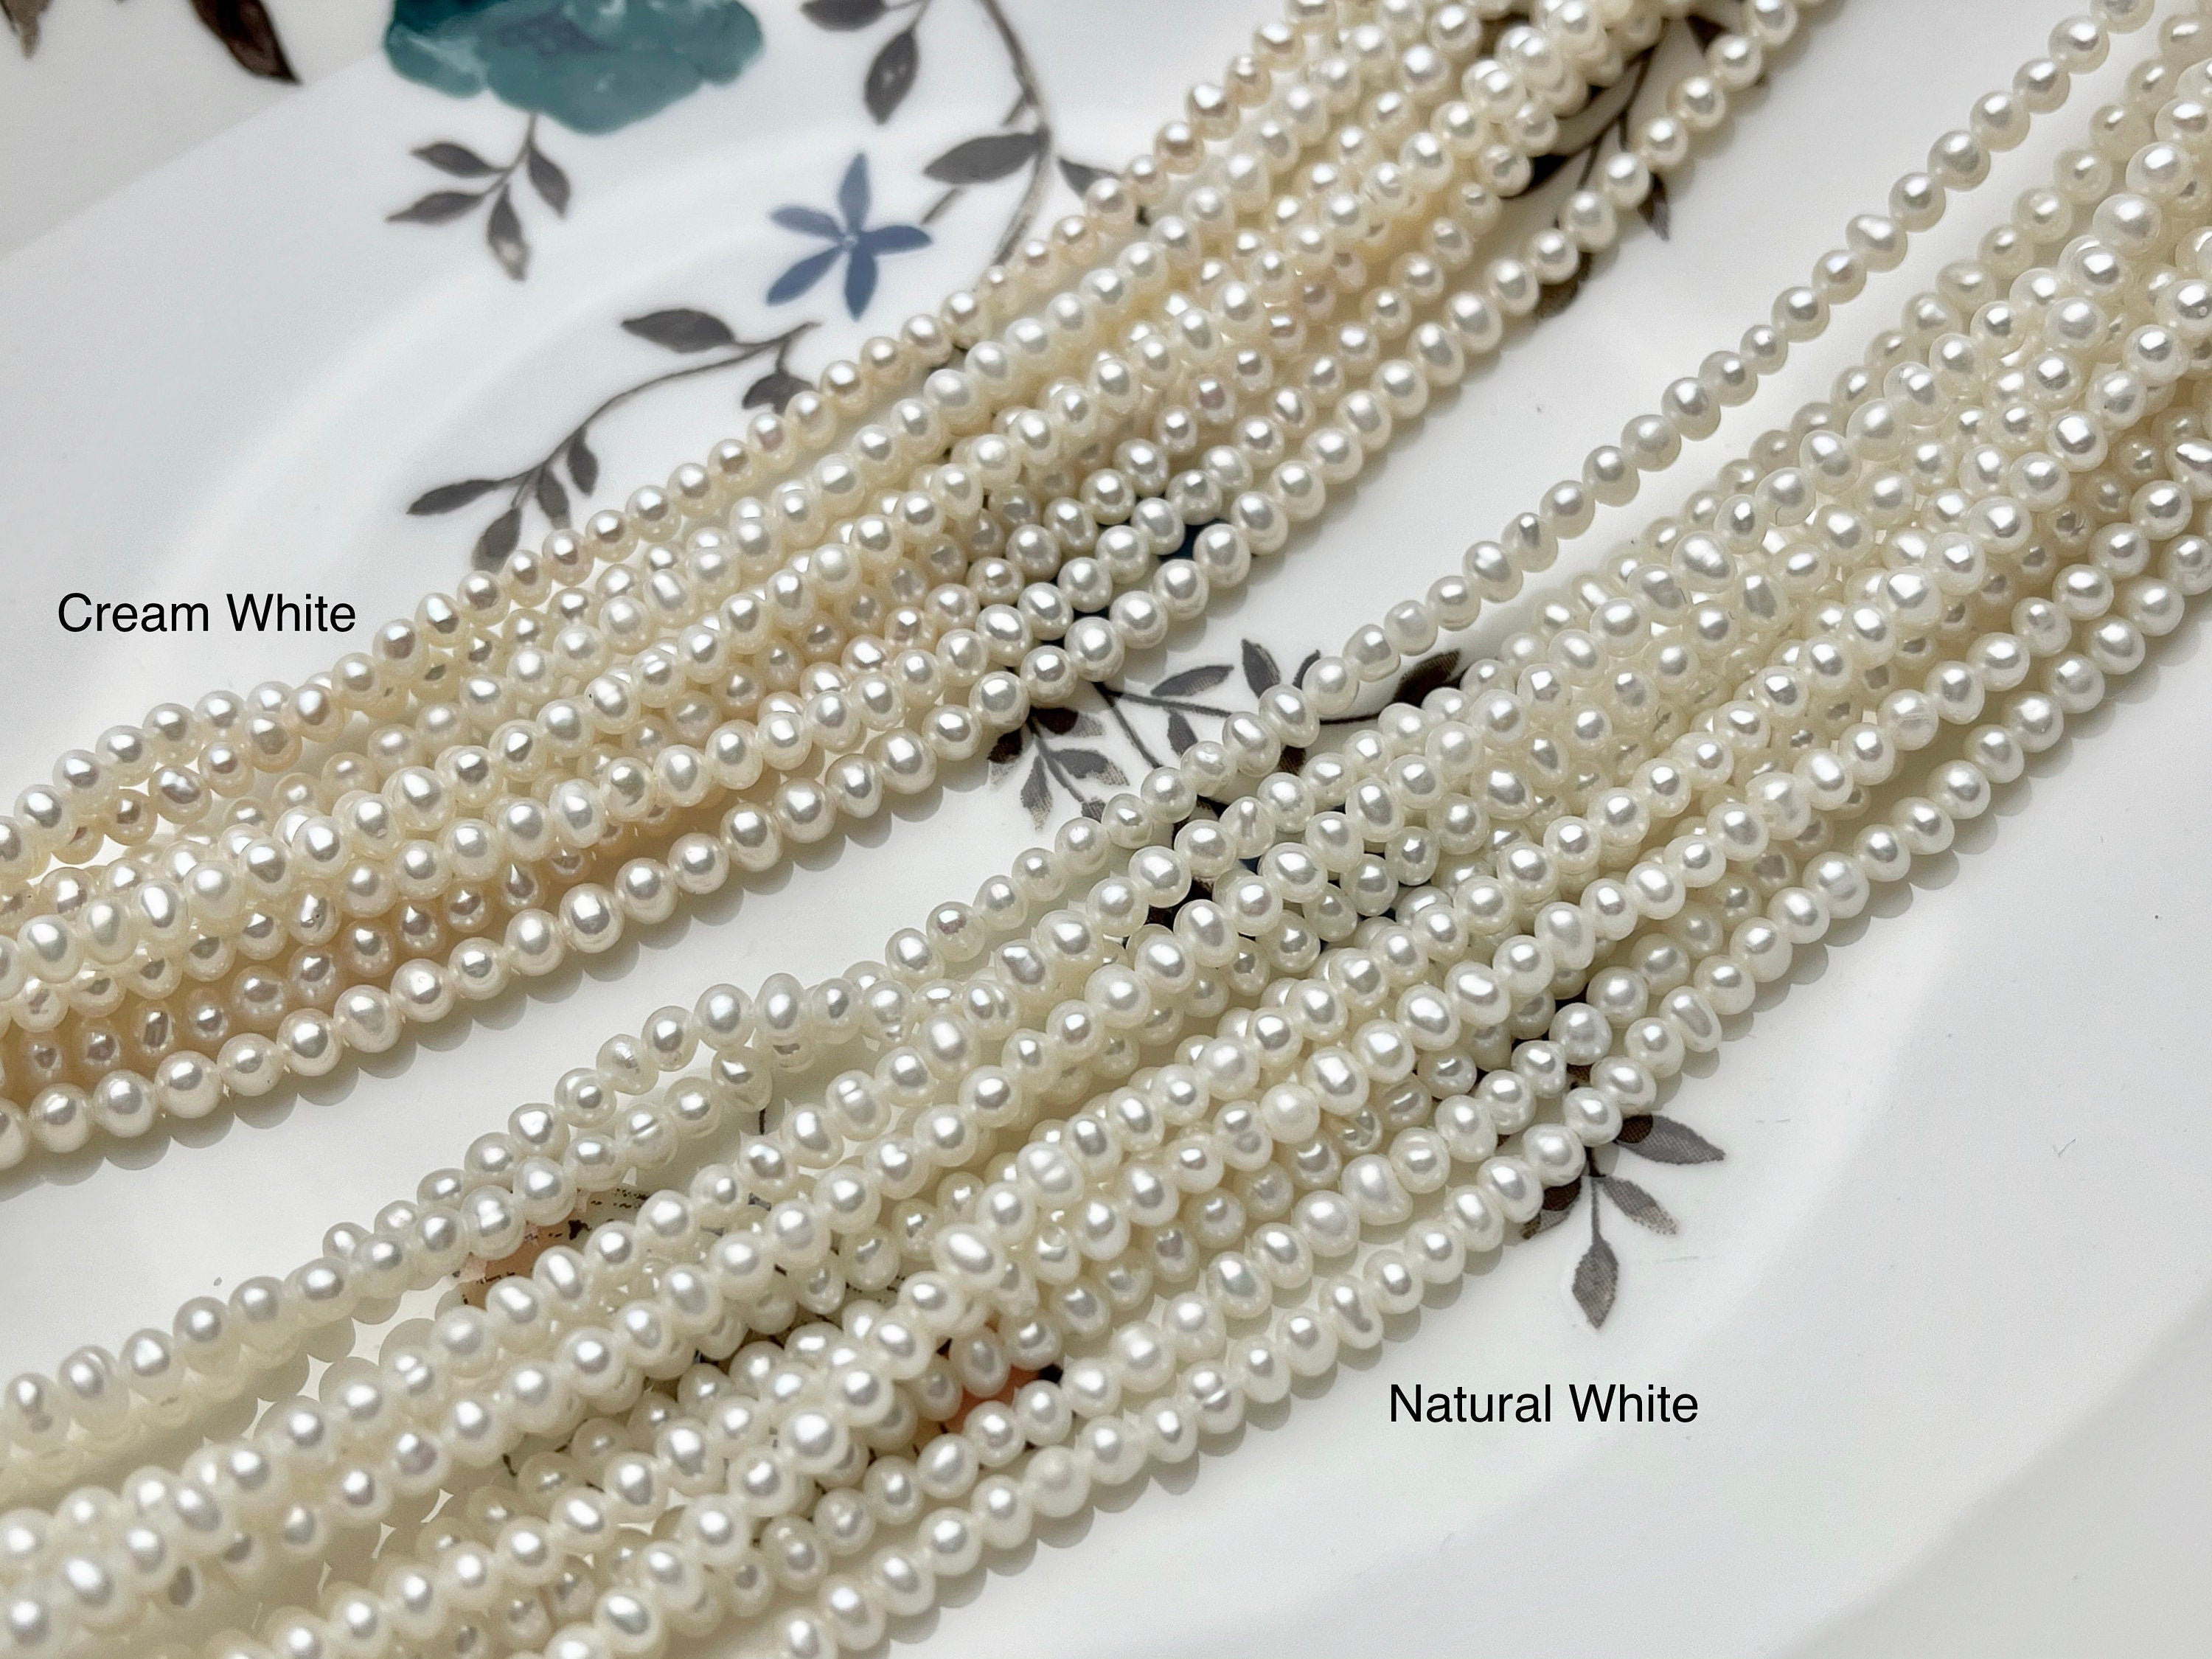 2.5-3mm Tiny Pearls, Natural Potato Freshwater Pearl Beads, Seed Pearl  Jewelry, Natural Pink Lavender Color Small Pearl Seed Beads, FS400-XS 